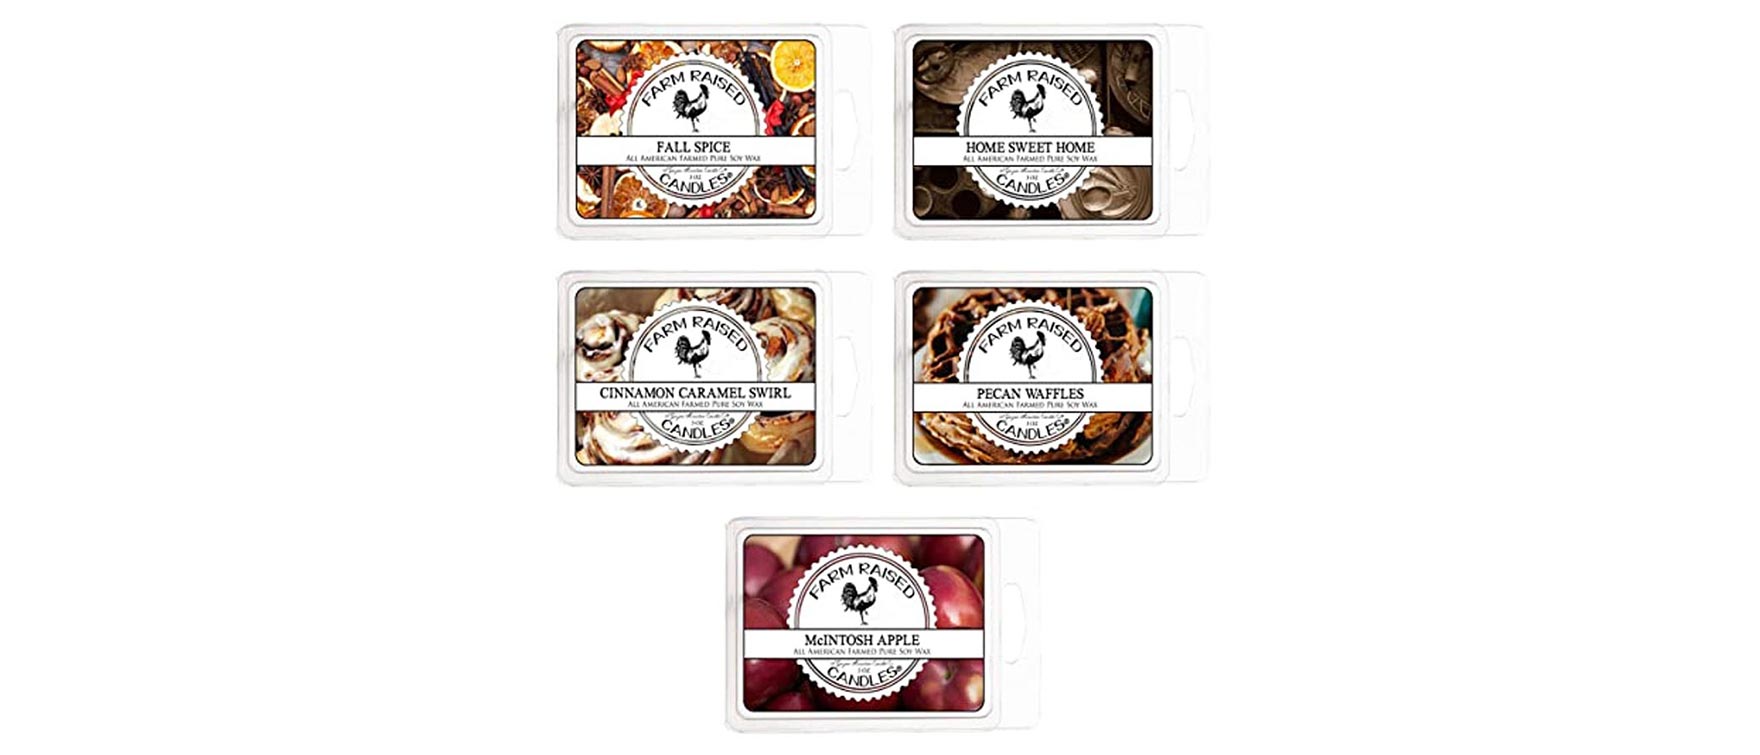 1. Farm Raised Candles - Fall Spice 5 Pack